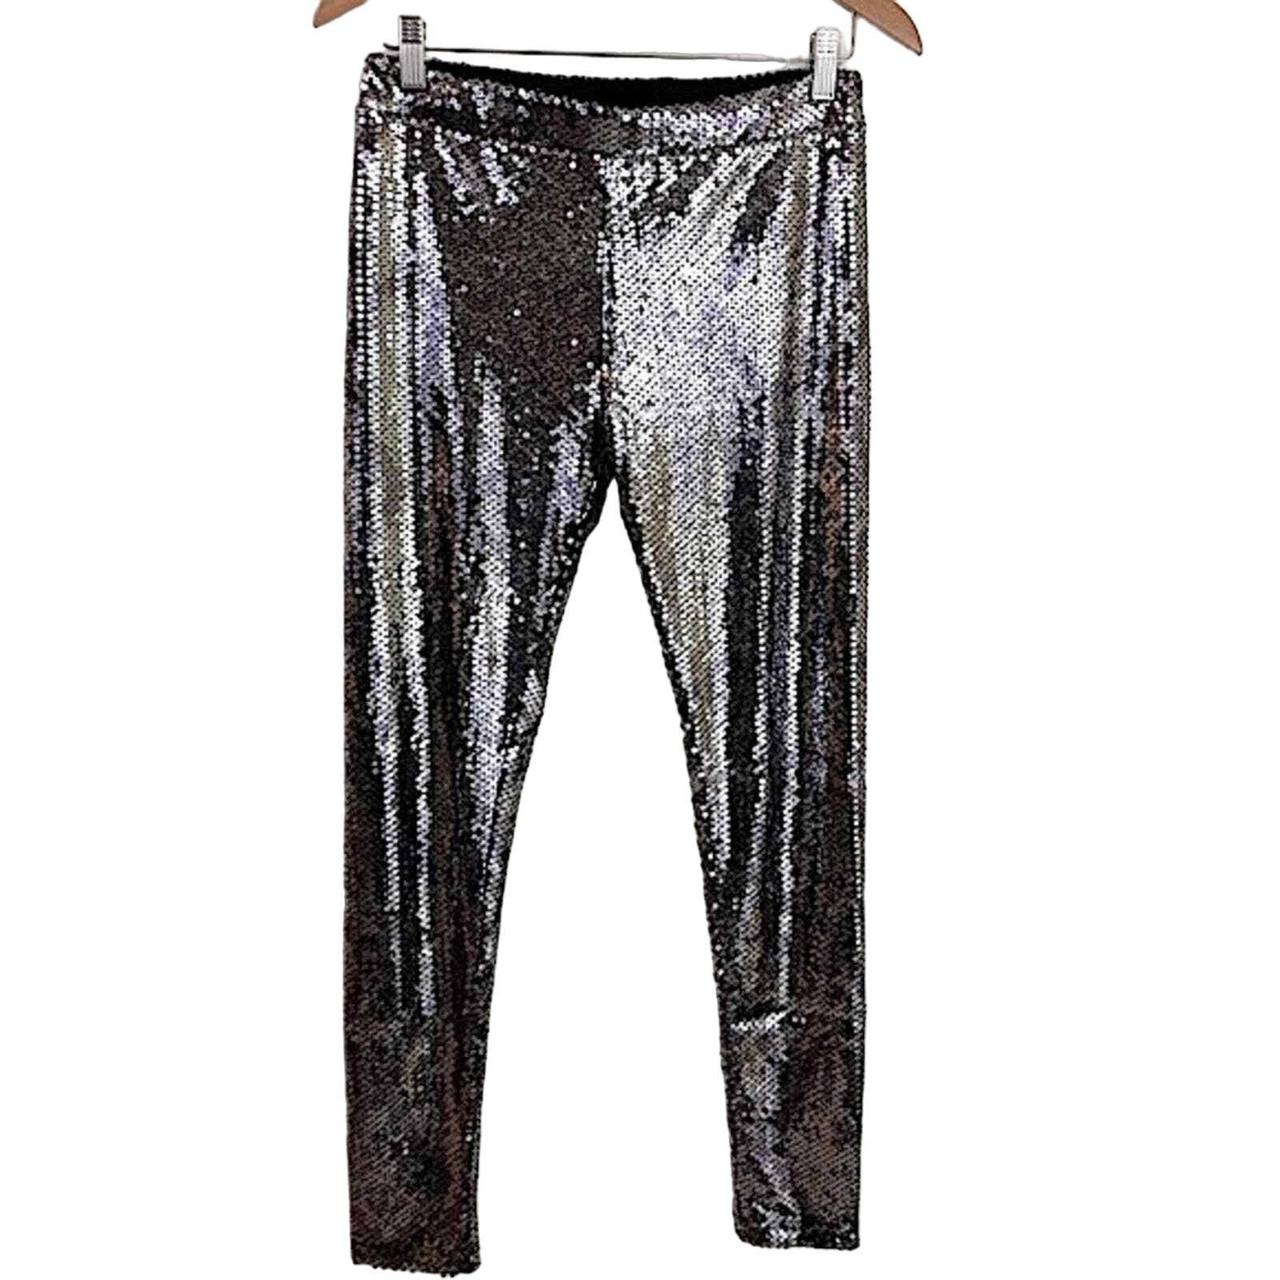 0503 Spring Summer Punk PU Sequins Leggings Sequin Pants Elastic High Waist  Sexy Club Faux Leather Shiny Silver/Gold/Red 211215 From Luo02, $12.55 |  DHgate.Com